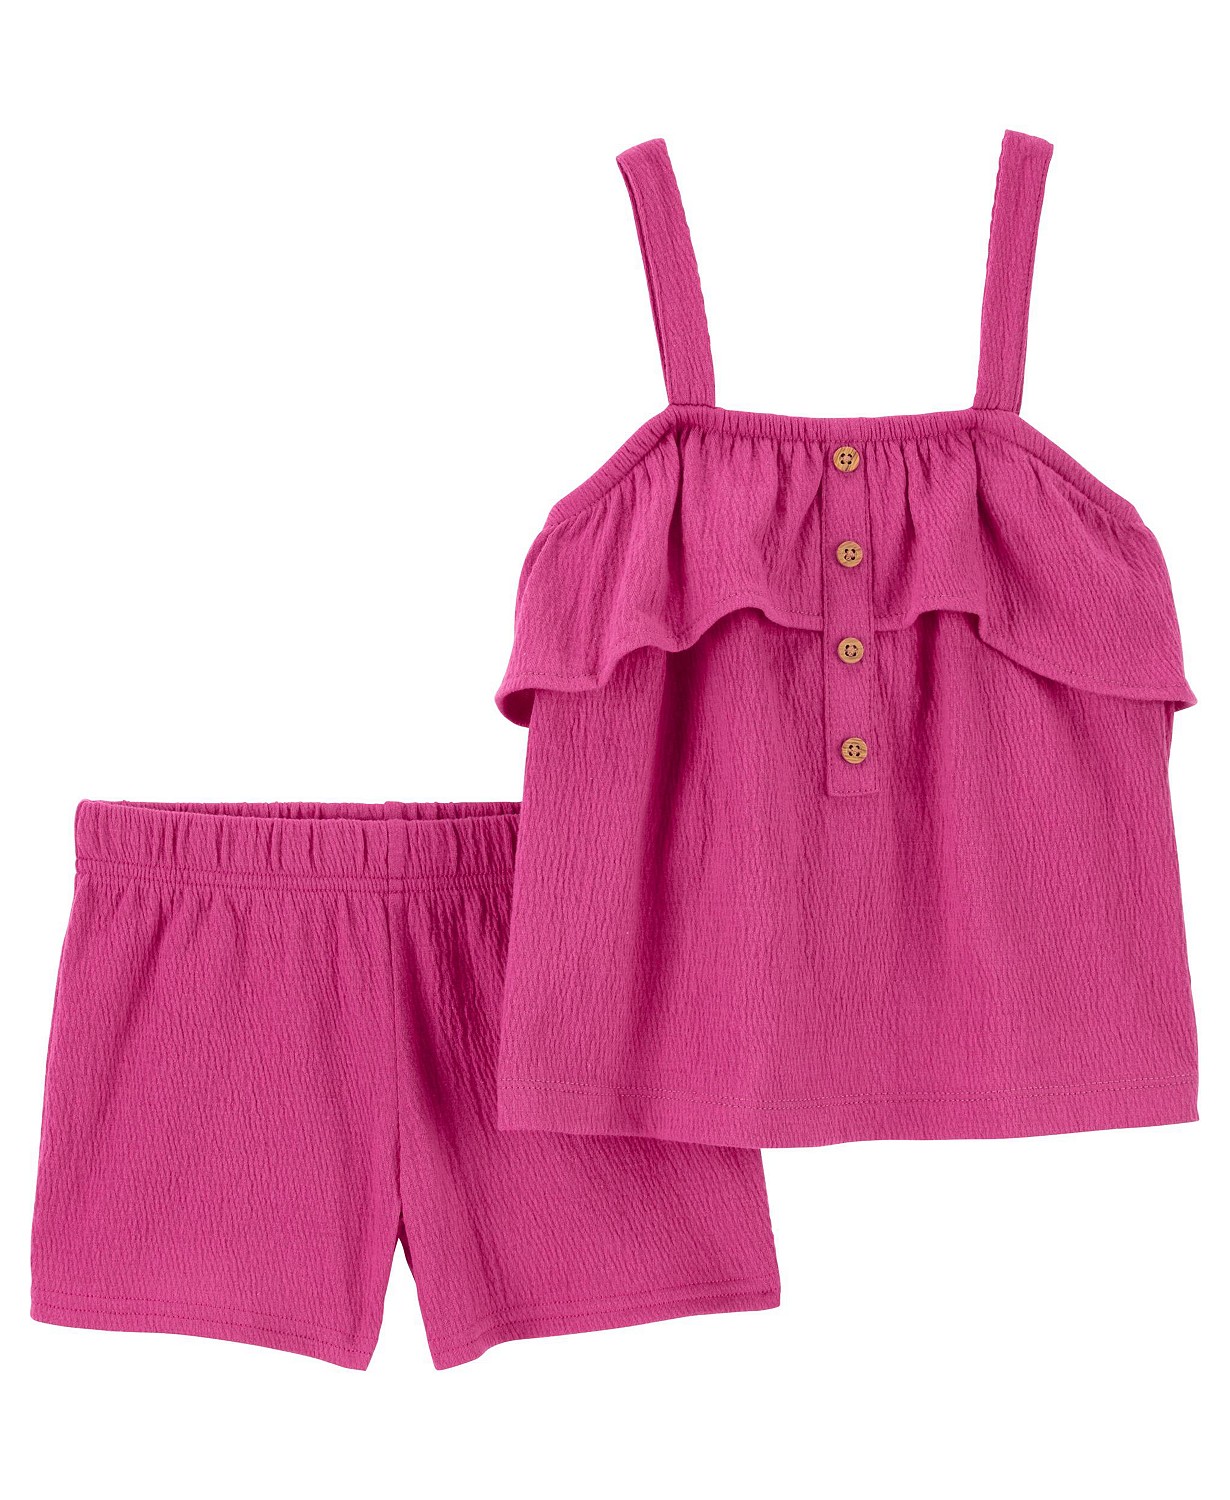 Toddler Girls Crinkle Jersey Tank Top and Shorts 2 Piece Set